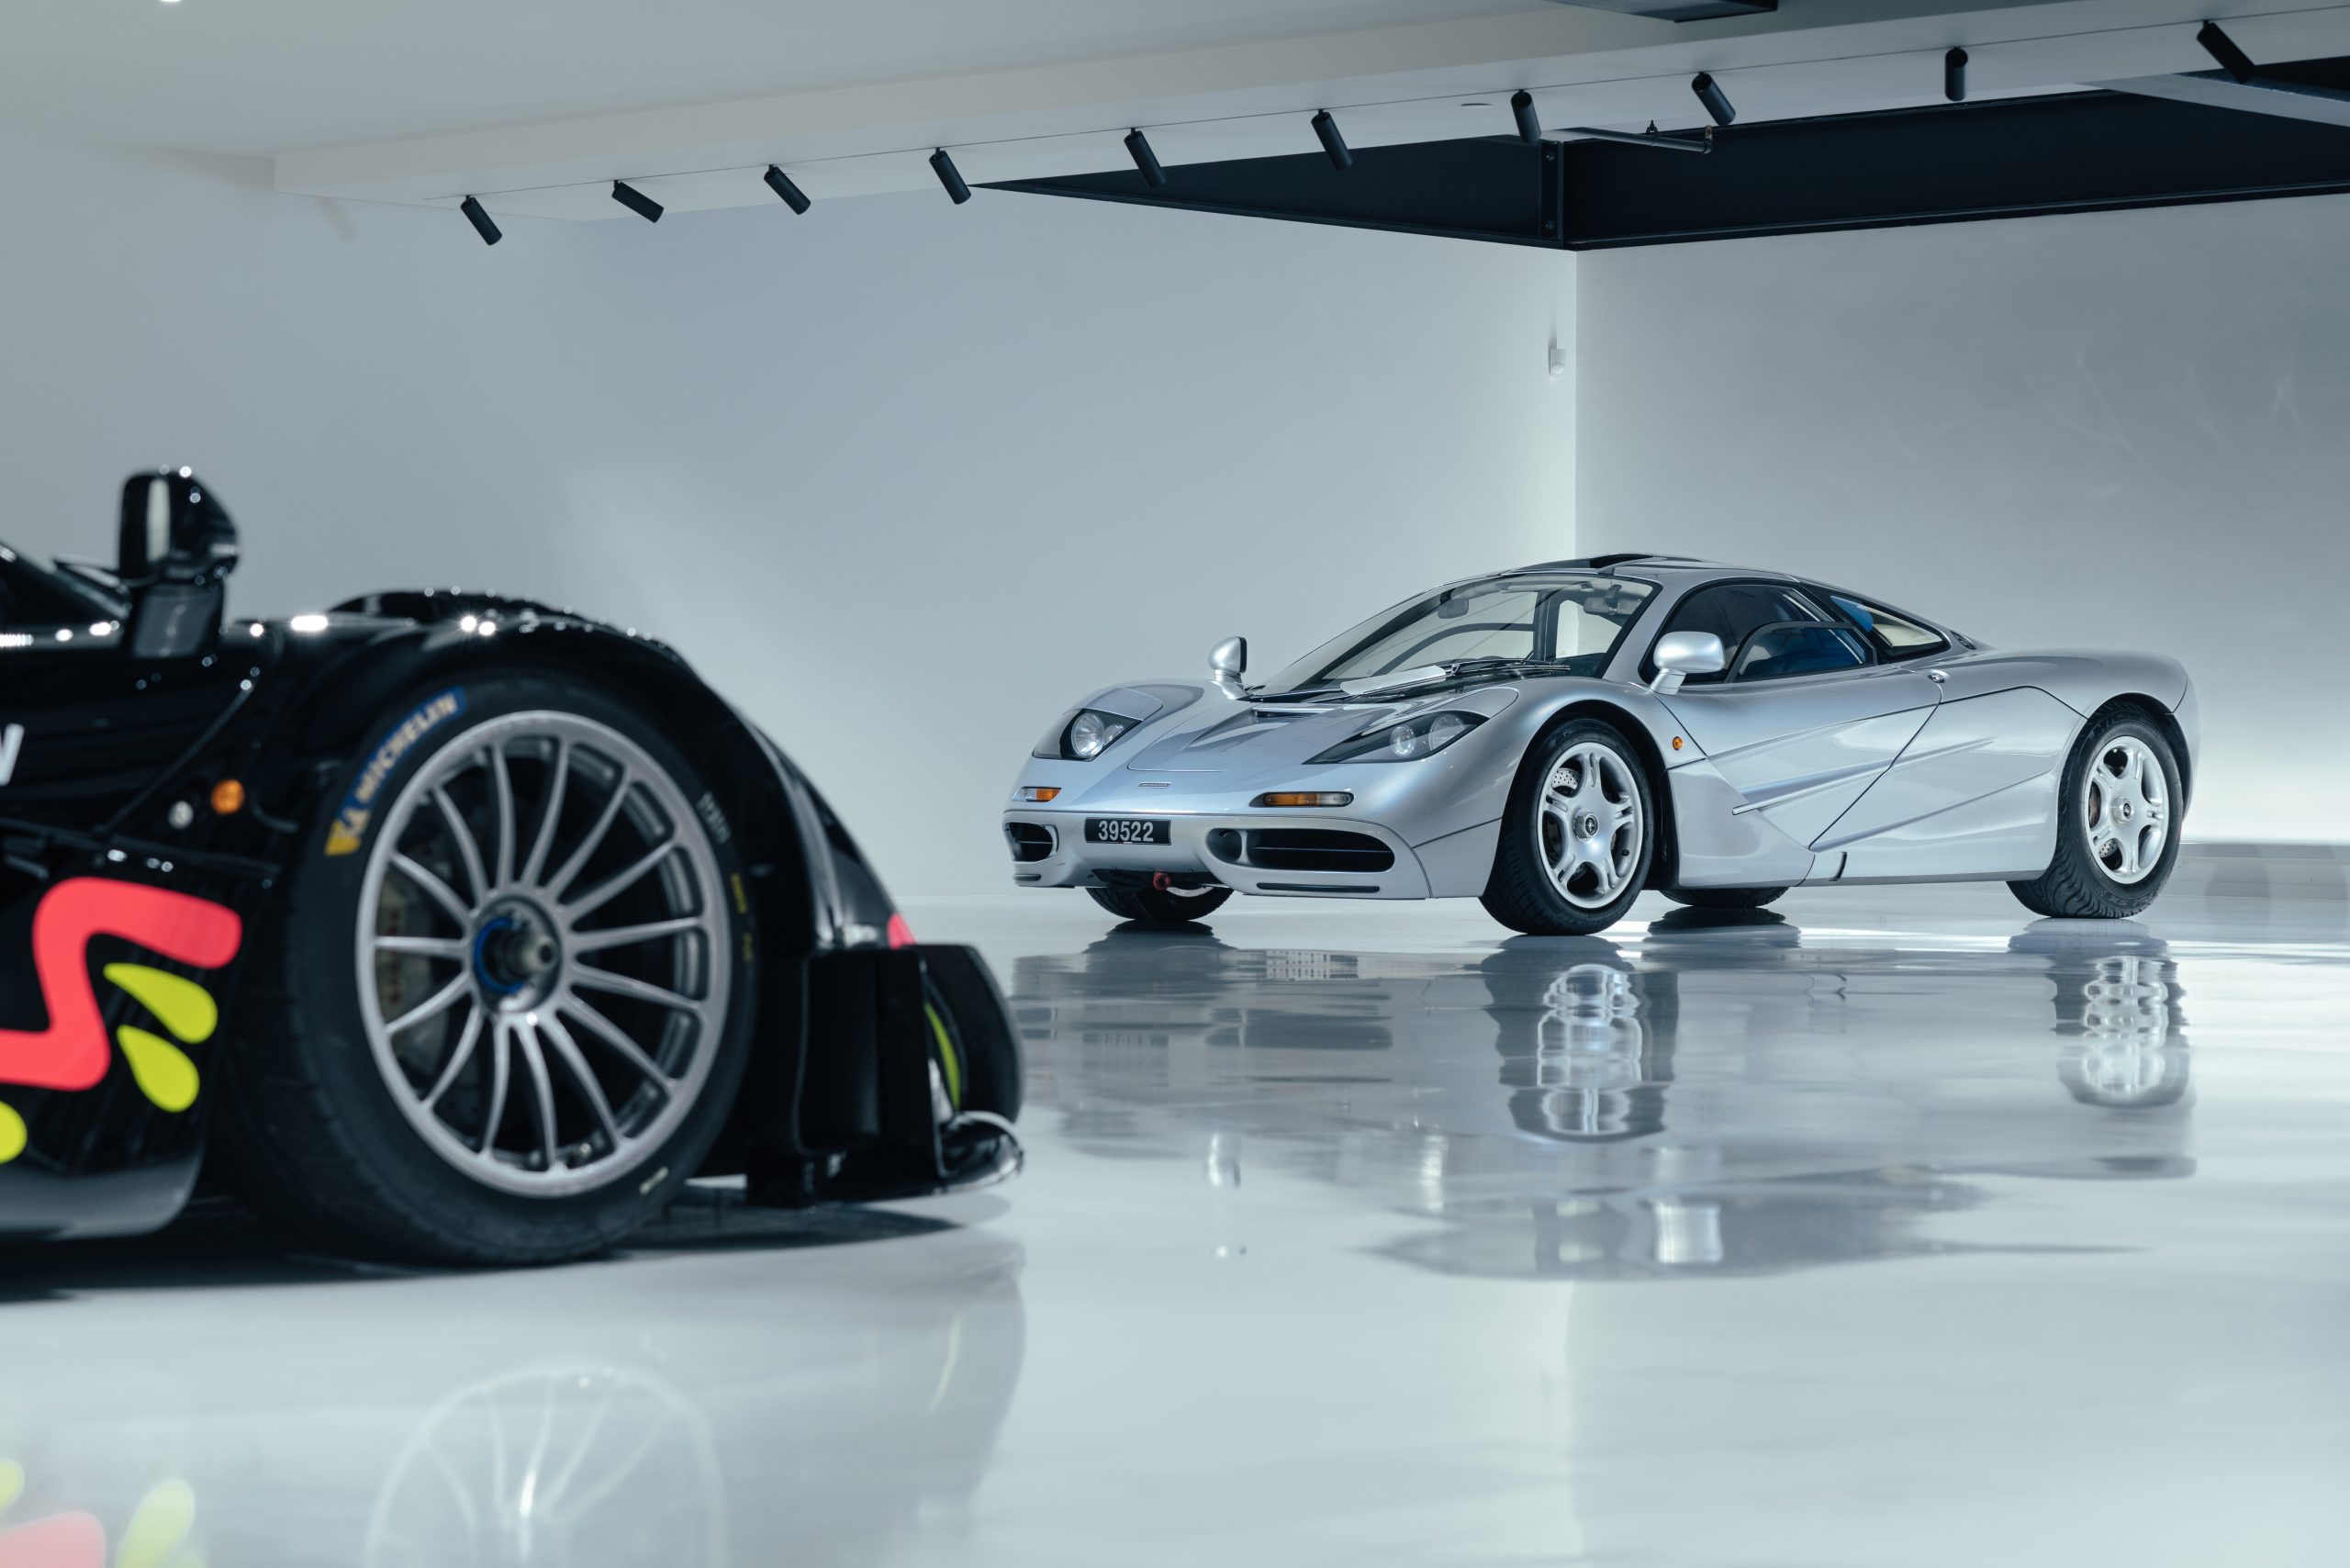 The McLaren F1 still has it 30 years later